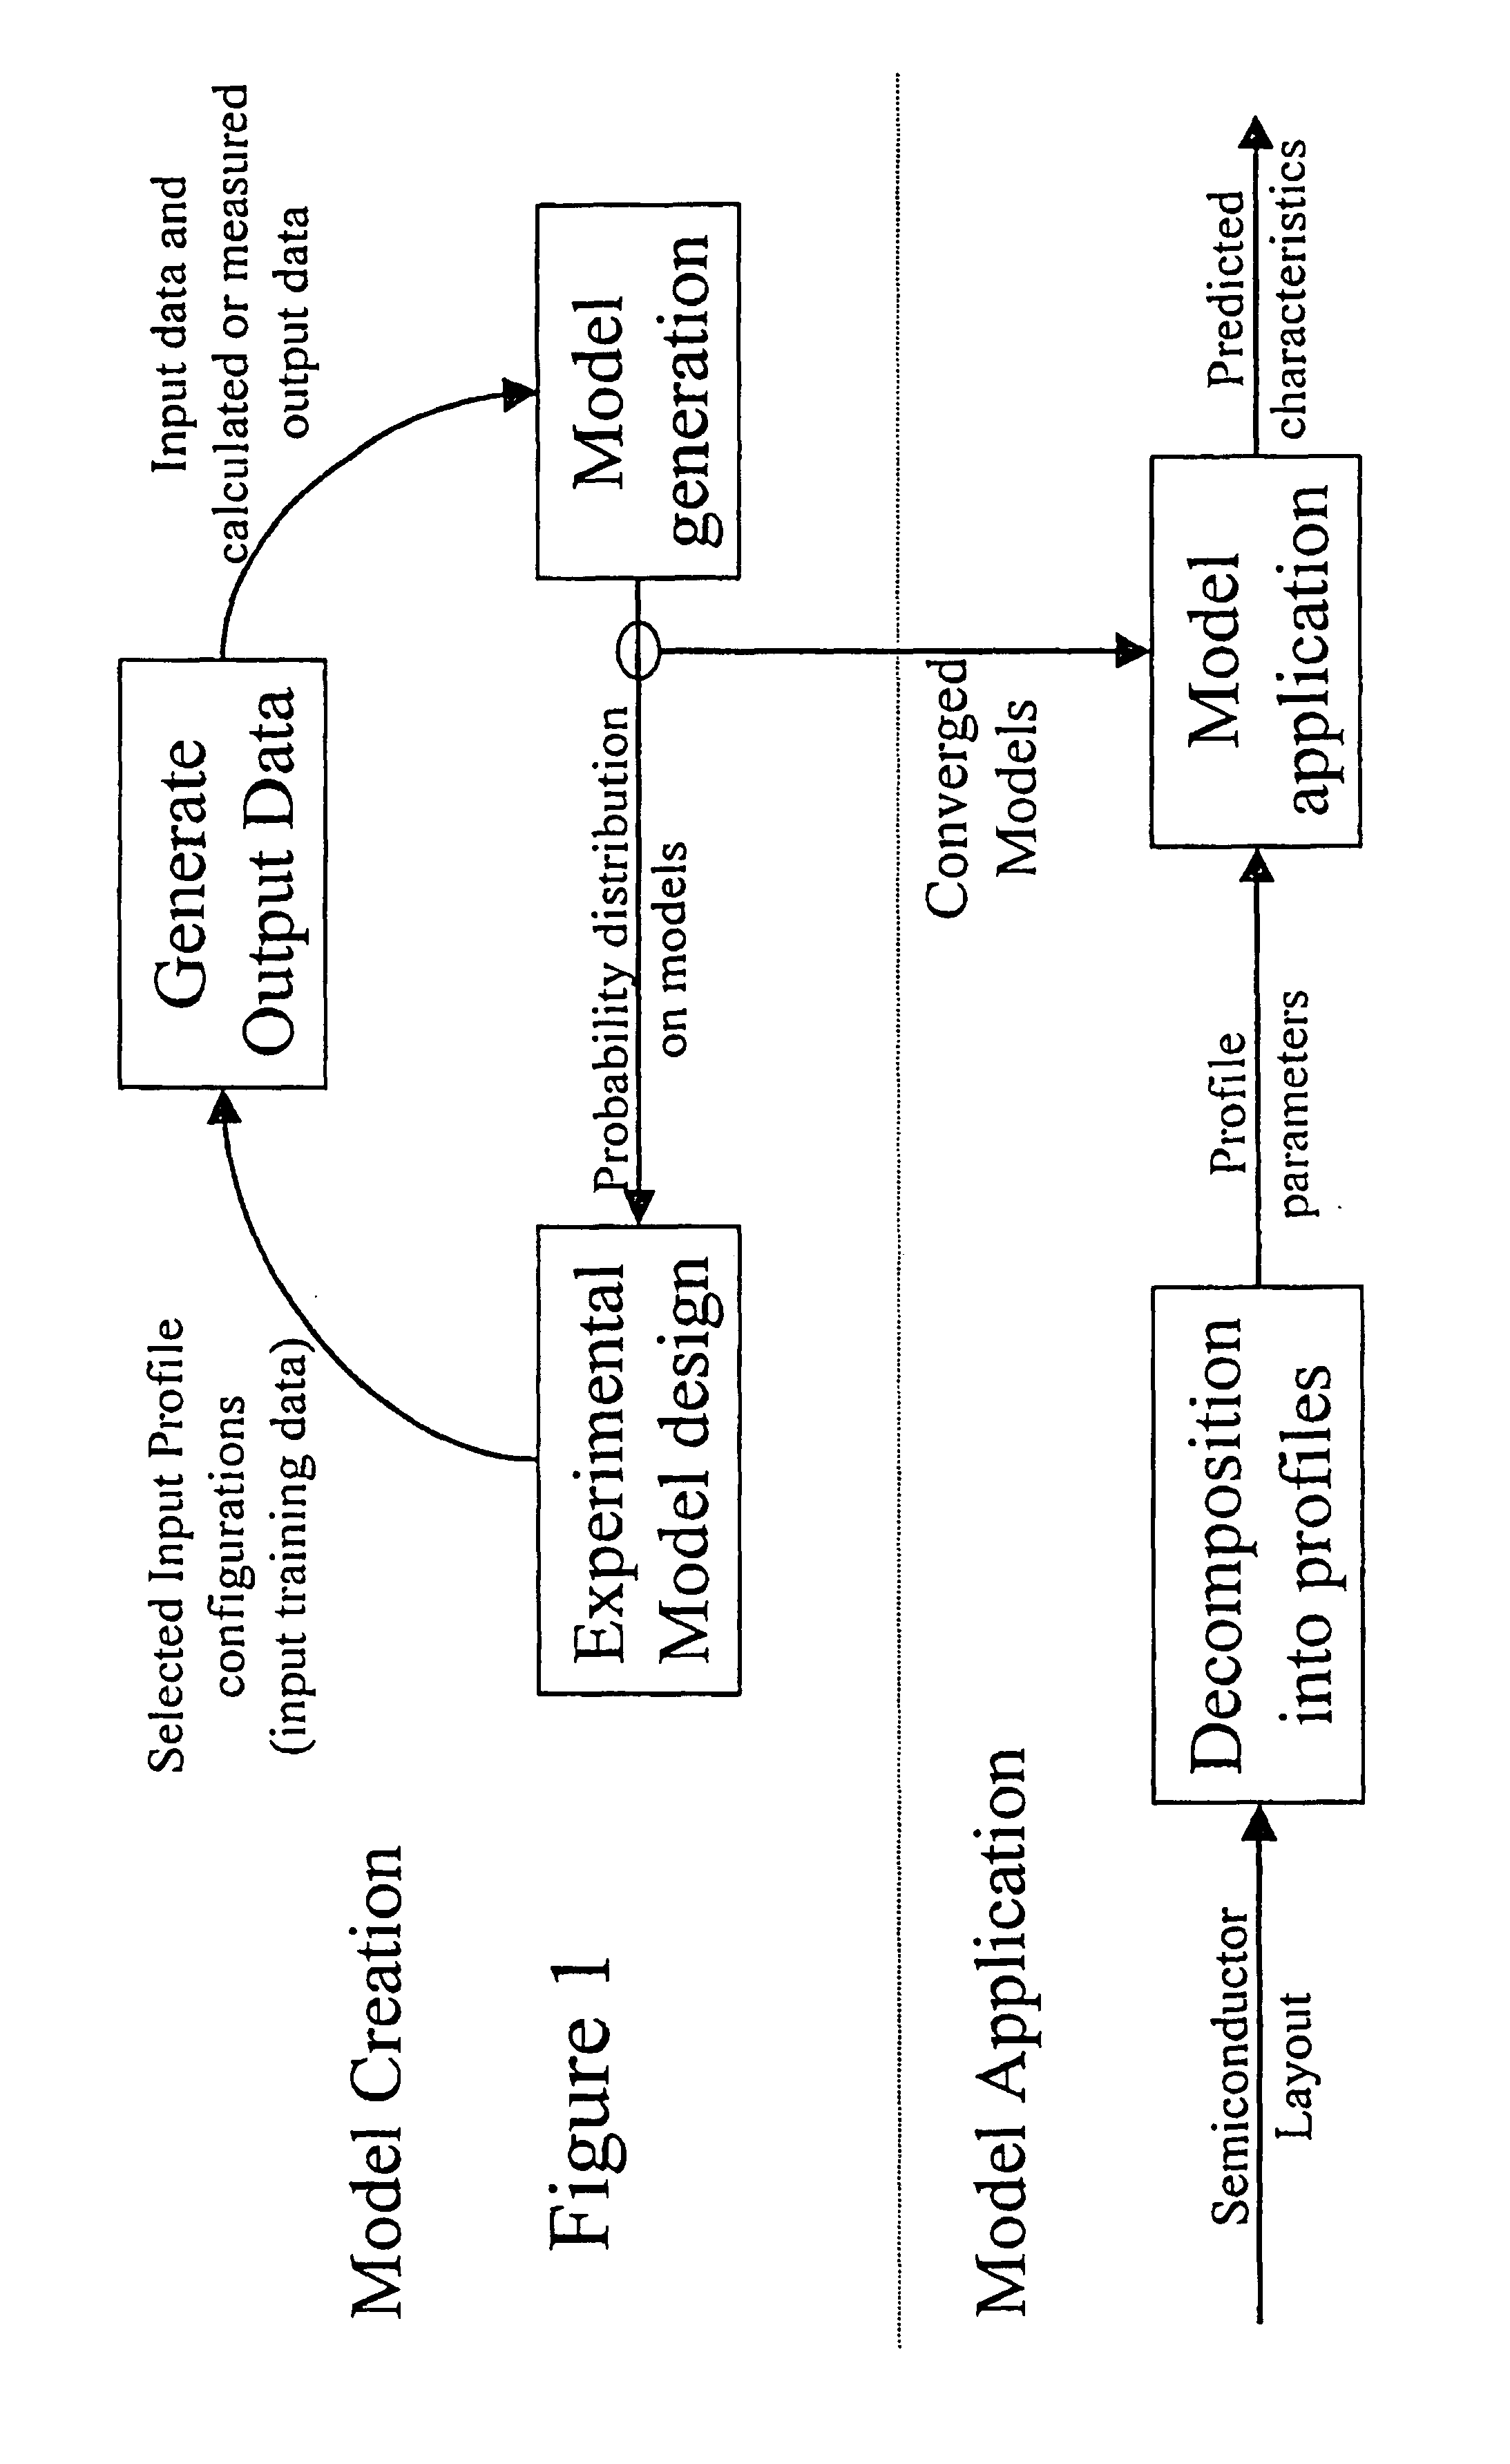 Method and apparatus for performing extraction using a model trained with Bayesian inference via a Monte Carlo method